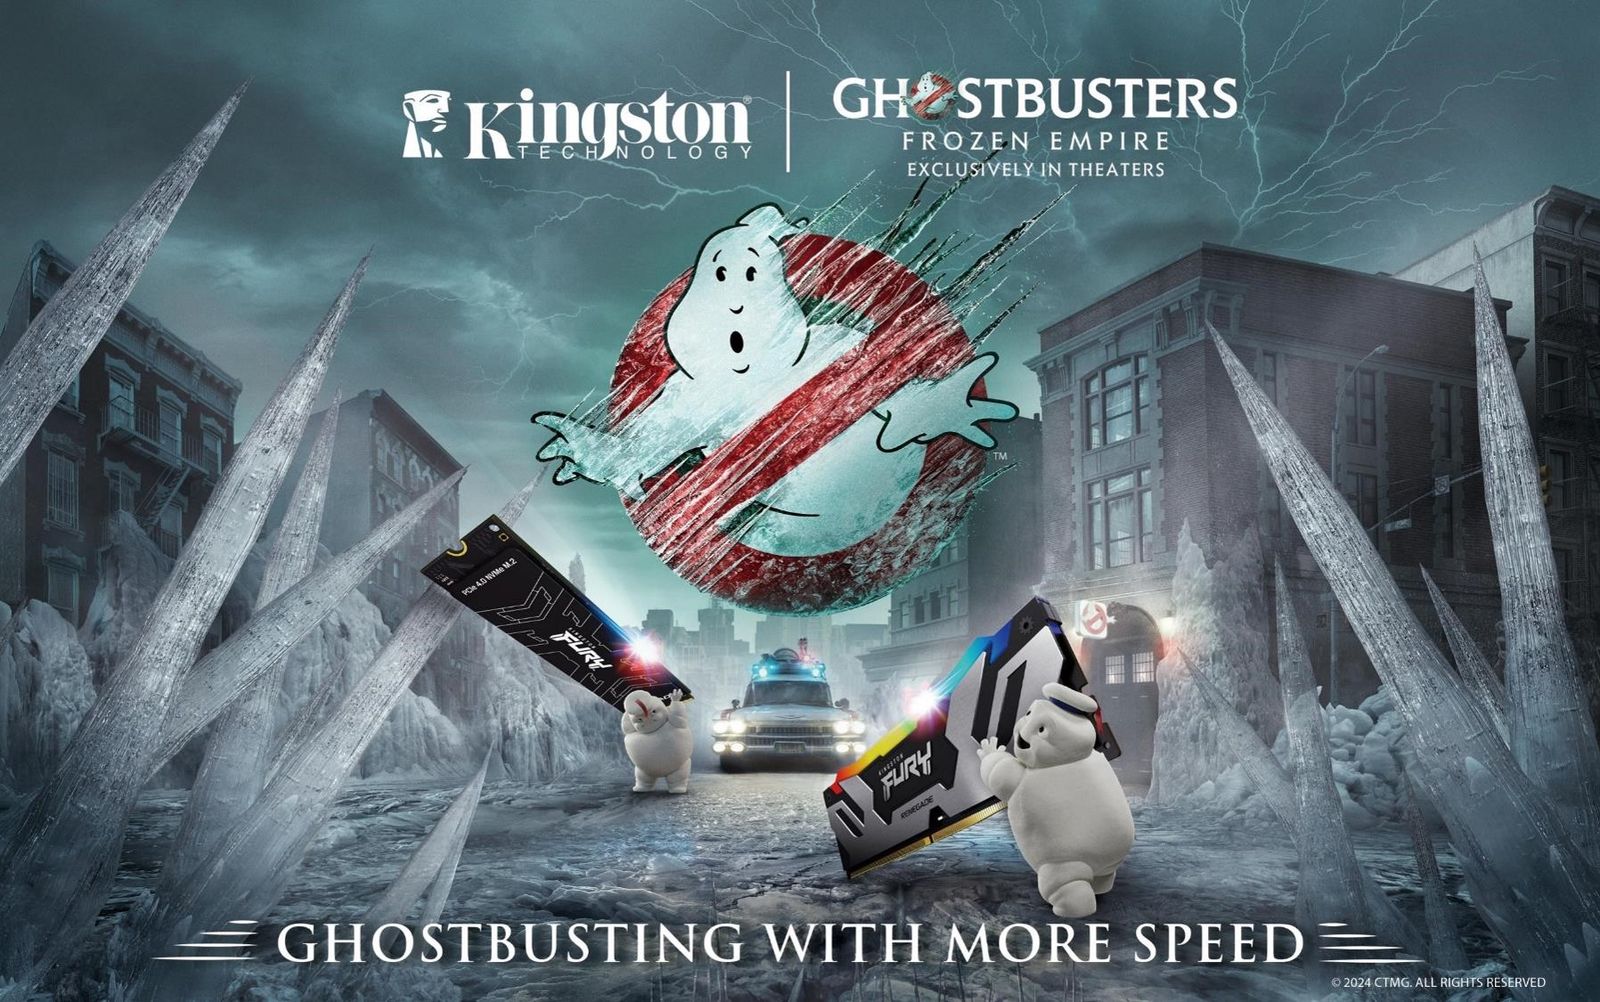 Press Photo Kingston Technology Joins Forces Ghostbusters Frozen Empire result MMOSITE - Thông tin công nghệ, review, thủ thuật PC, gaming